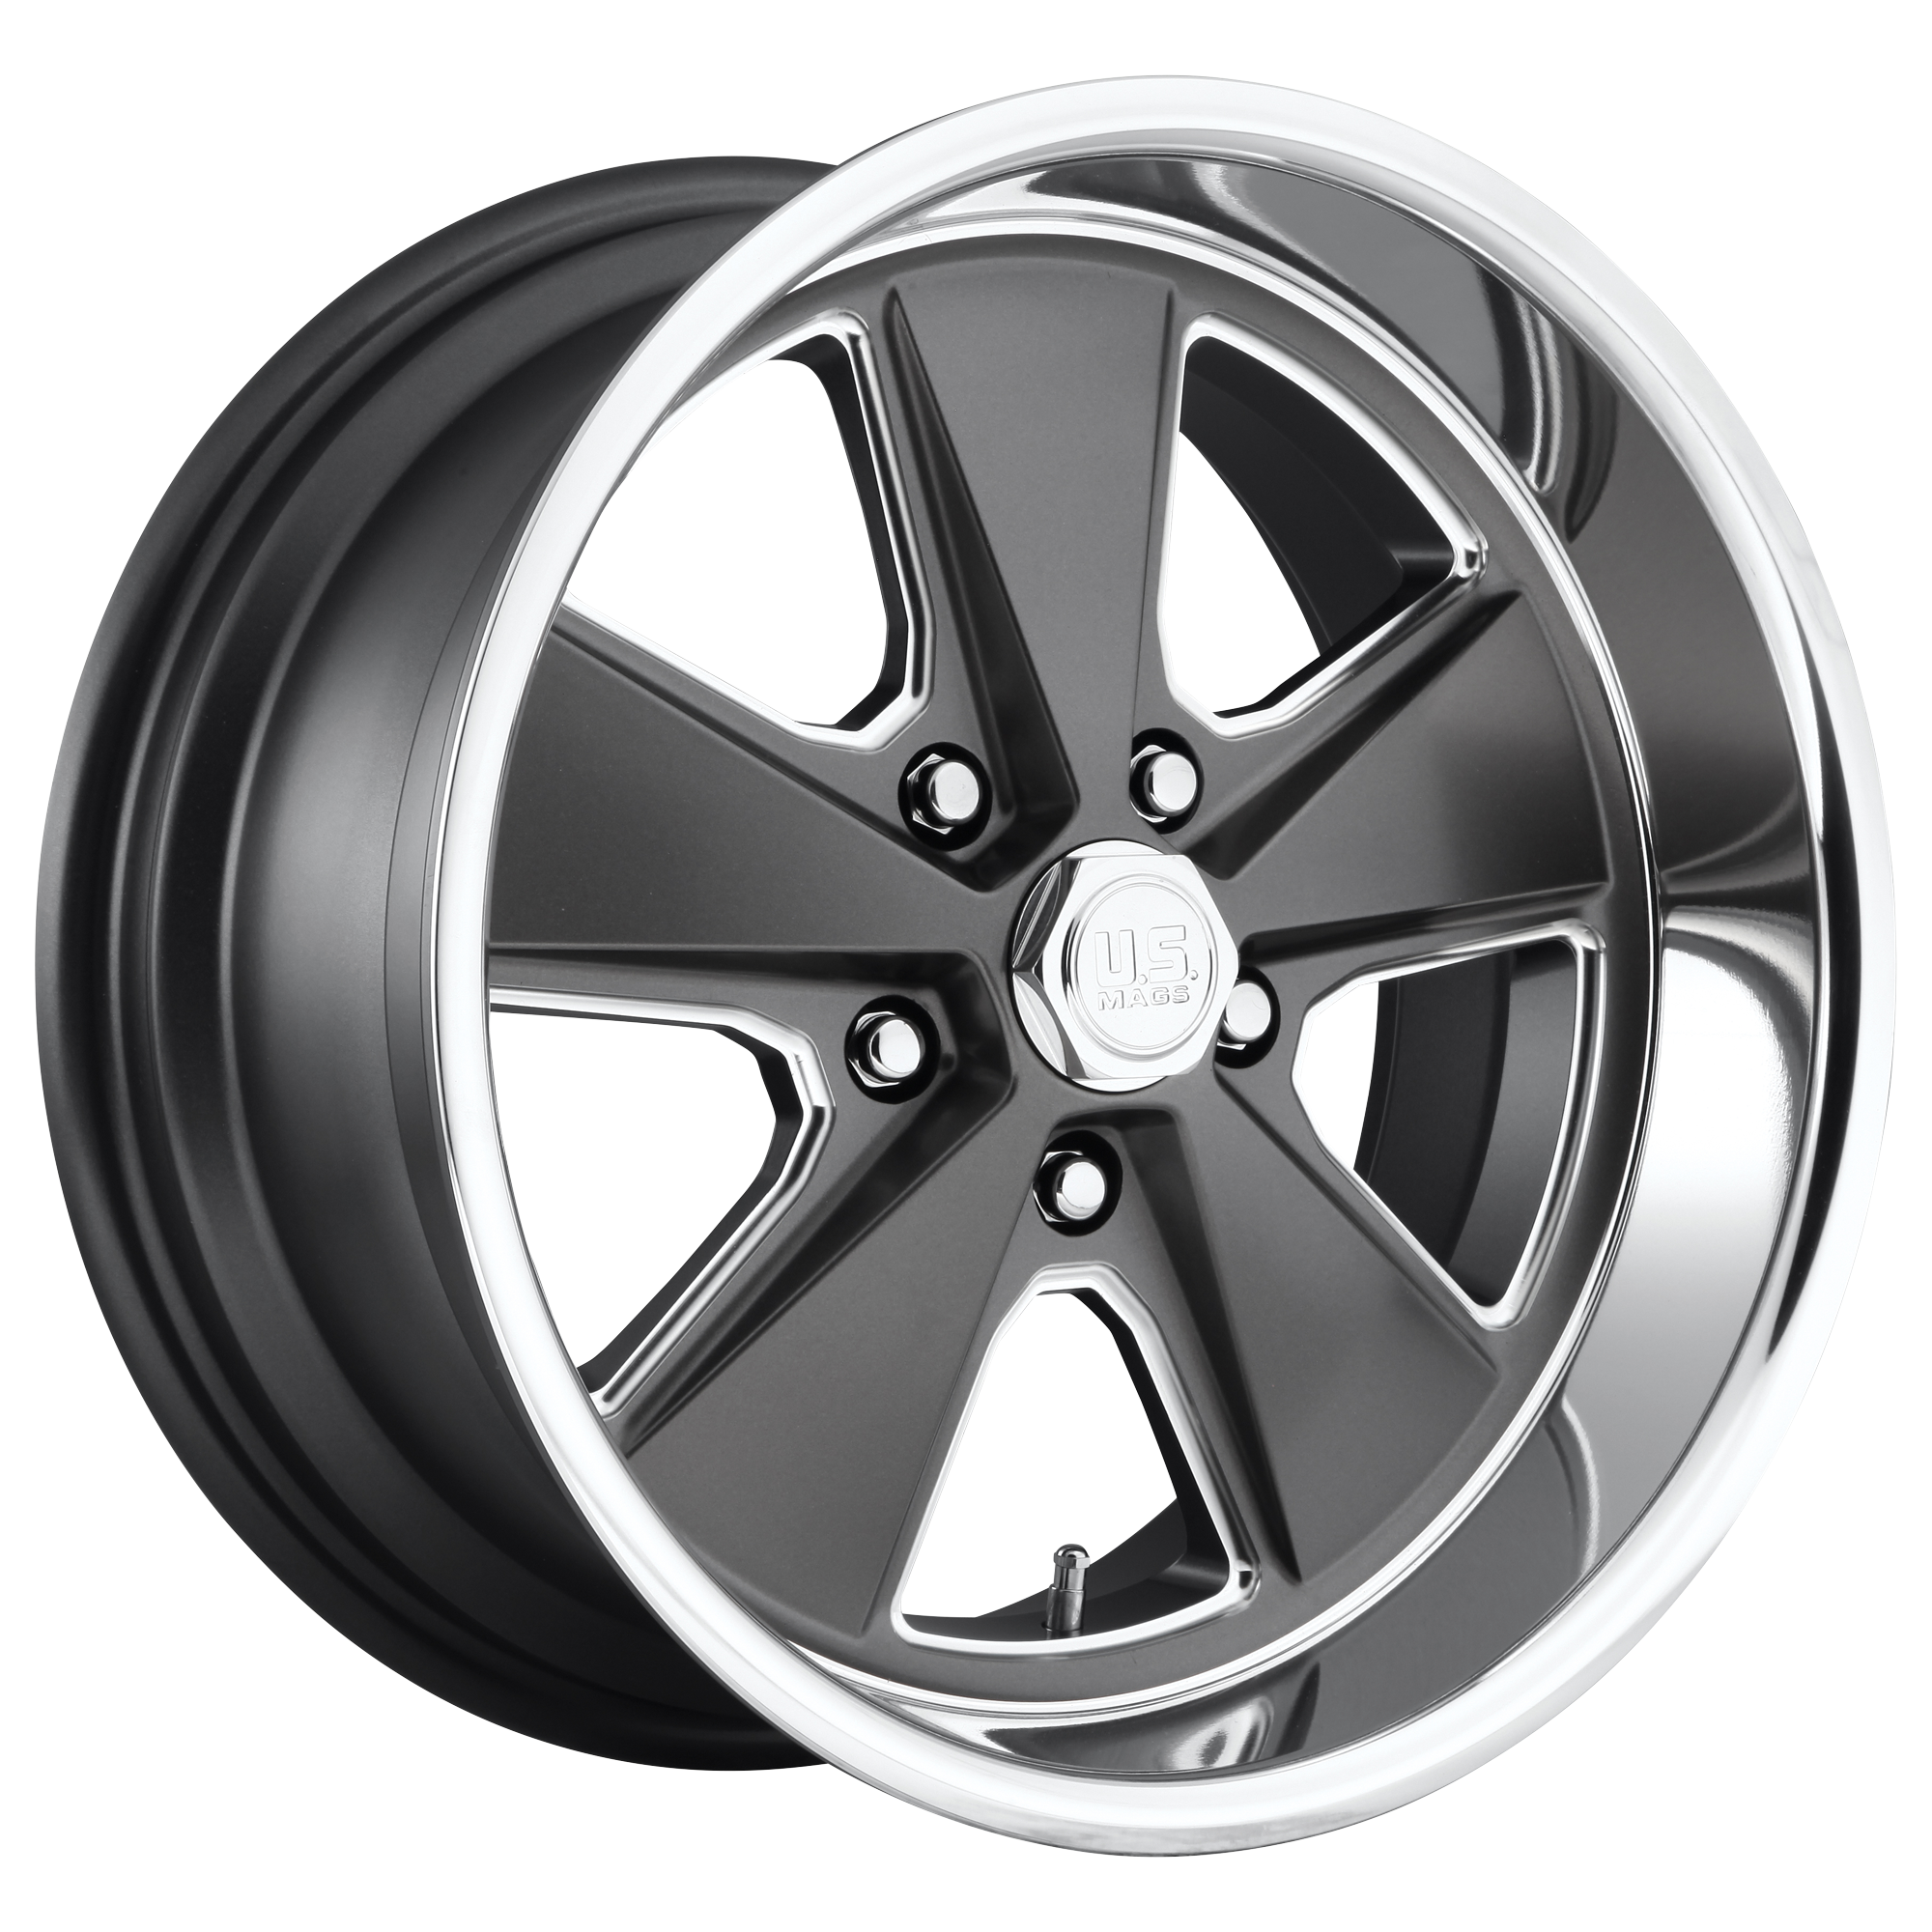 ROADSTER 20x9 5x115.00 MATTE GUN METAL MACHINED (18 mm) - Tires and Engine Performance